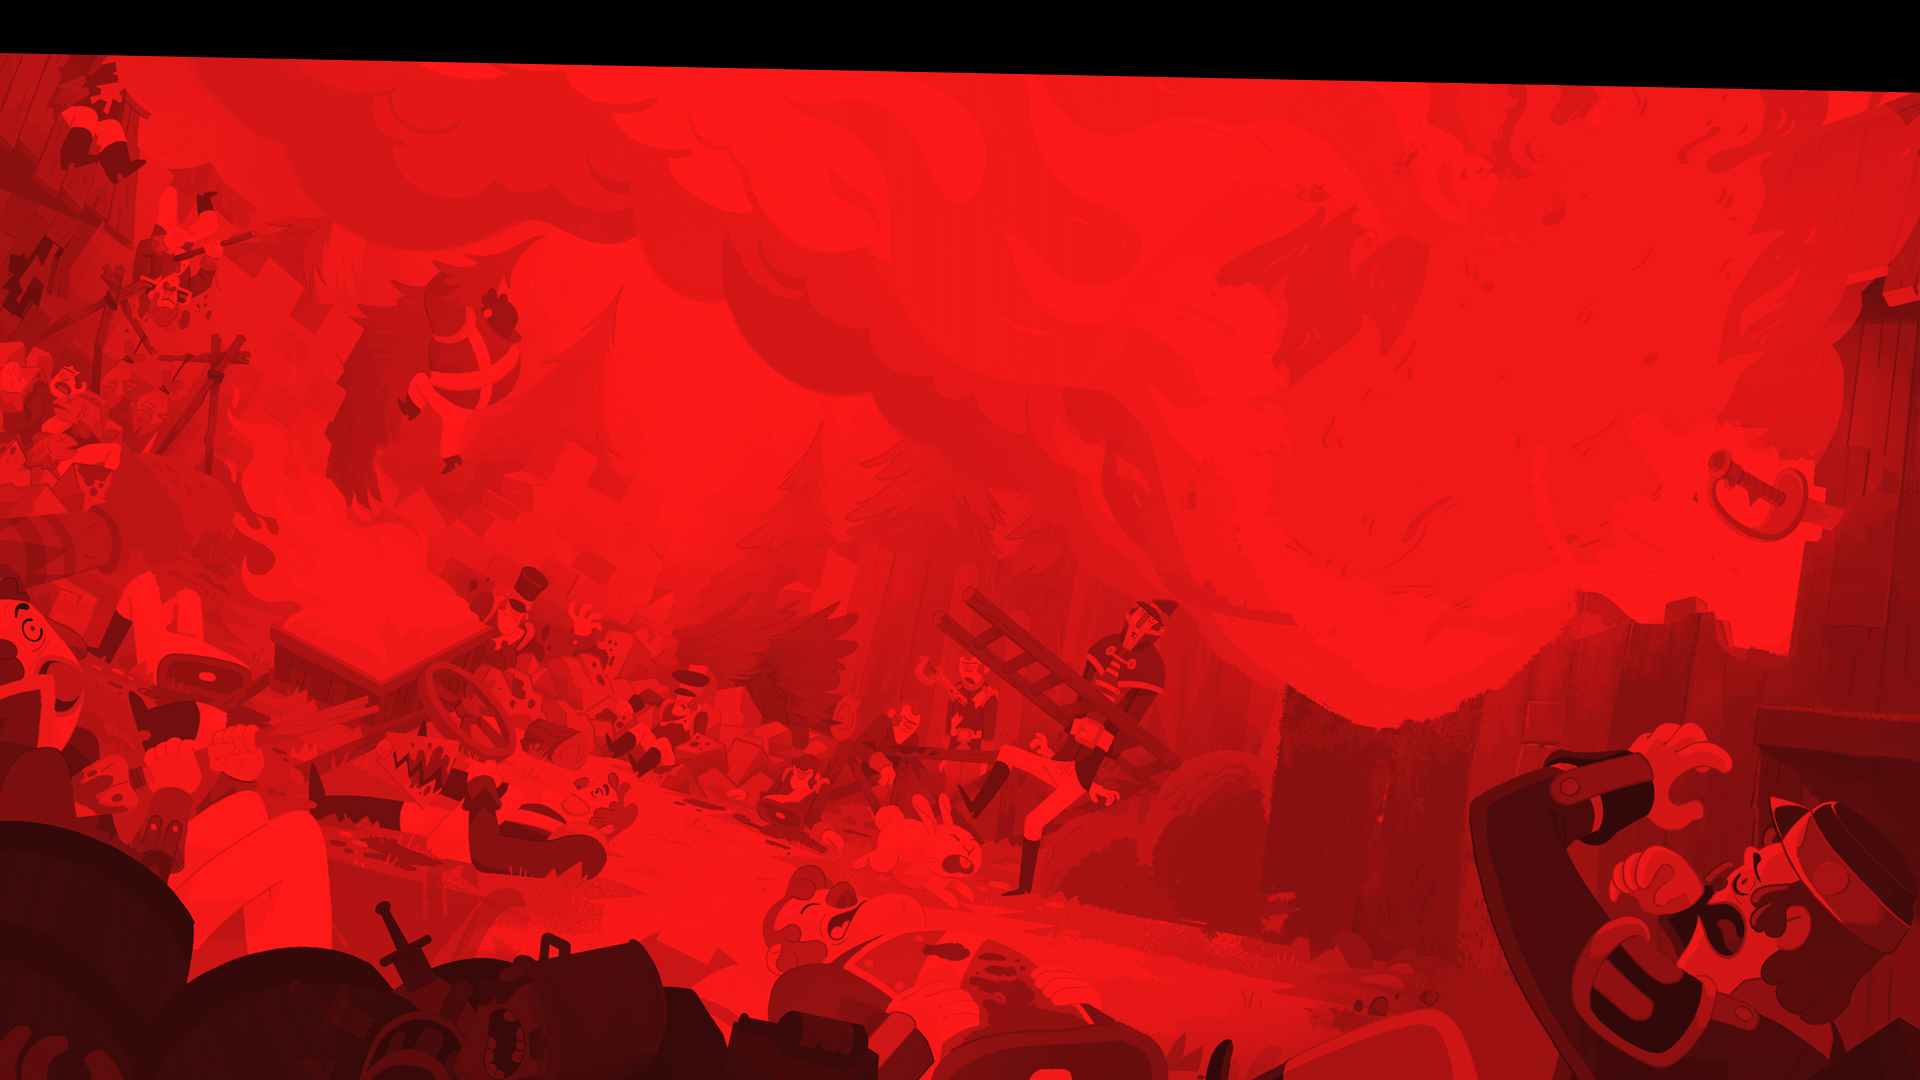 Splash background of a battlefield with a red overlay.